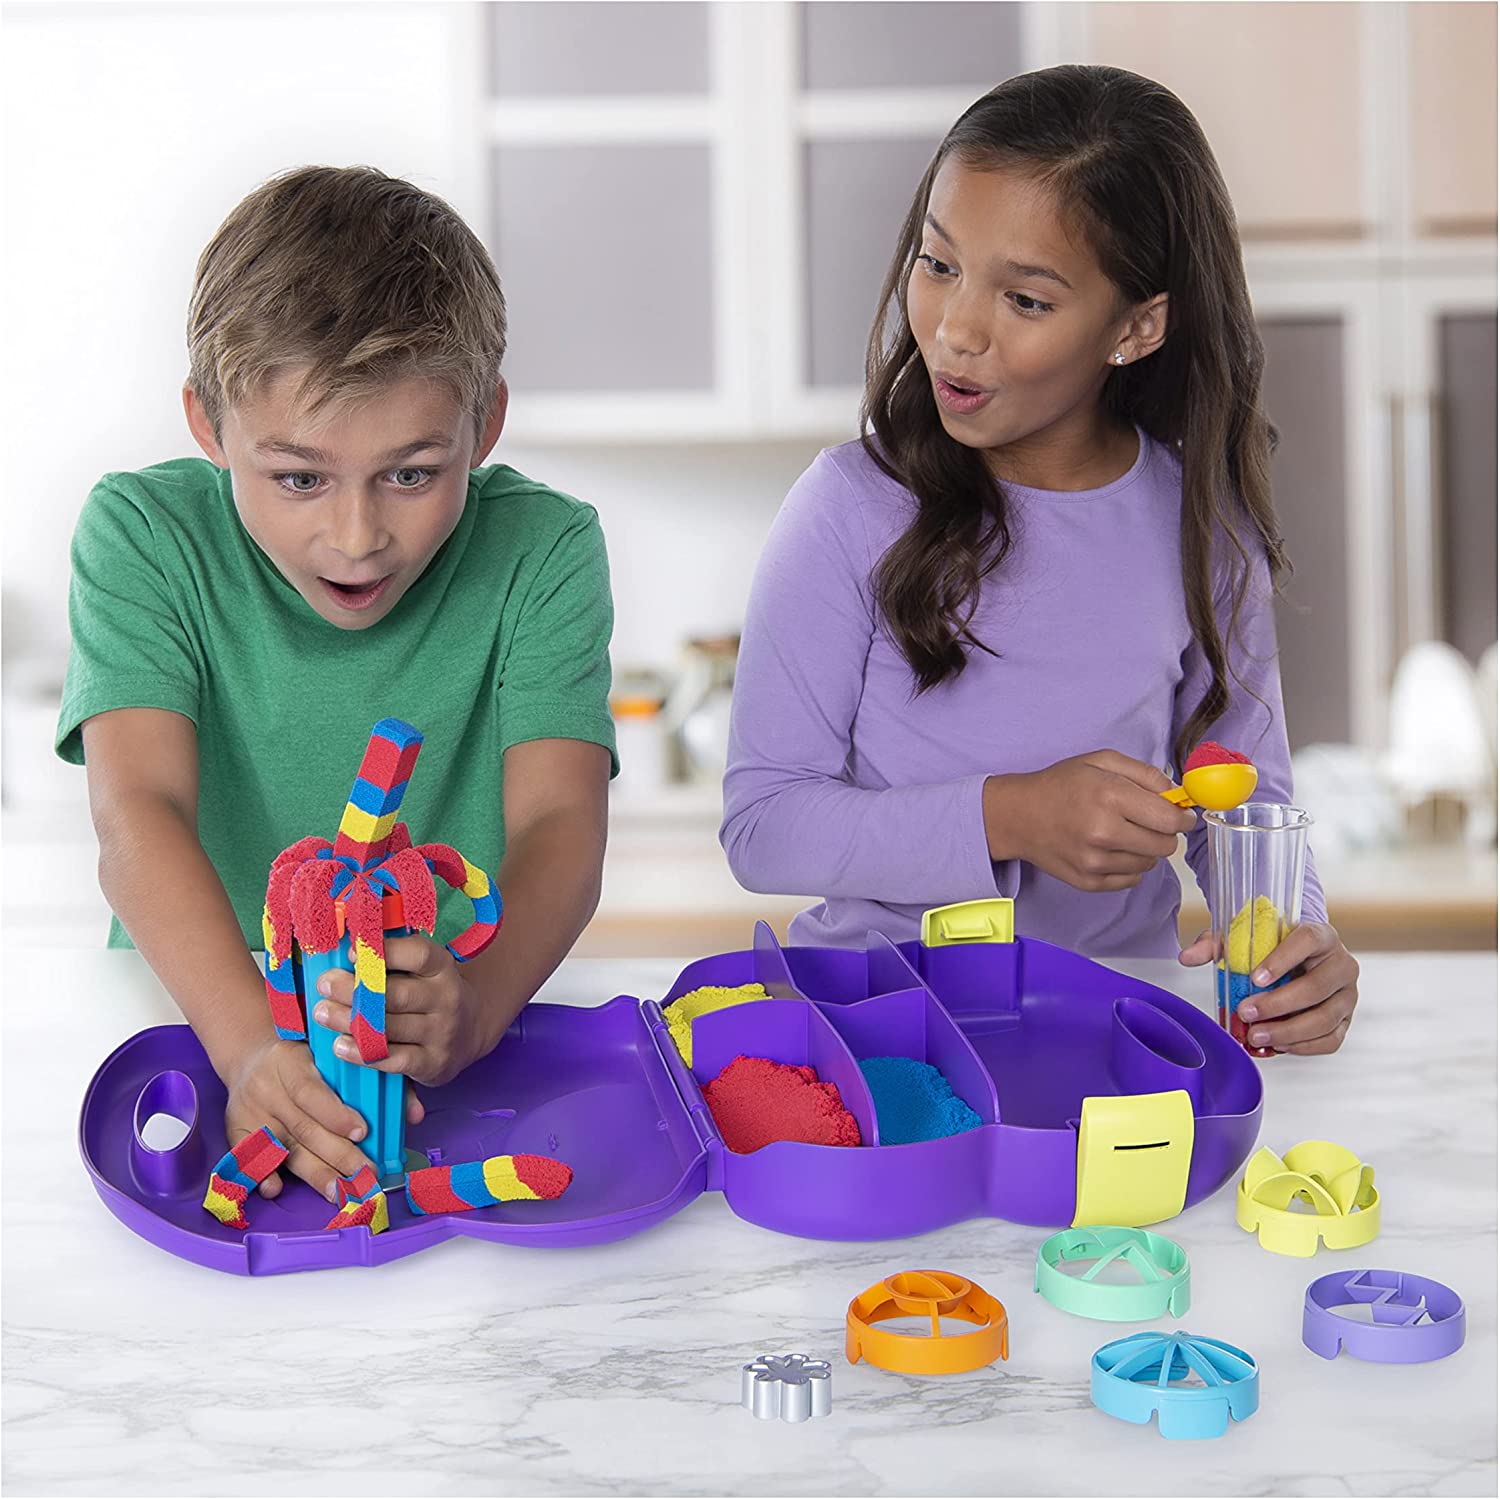 Set The One & Only  Kinetic Sand Sandwhirlz - Albagame